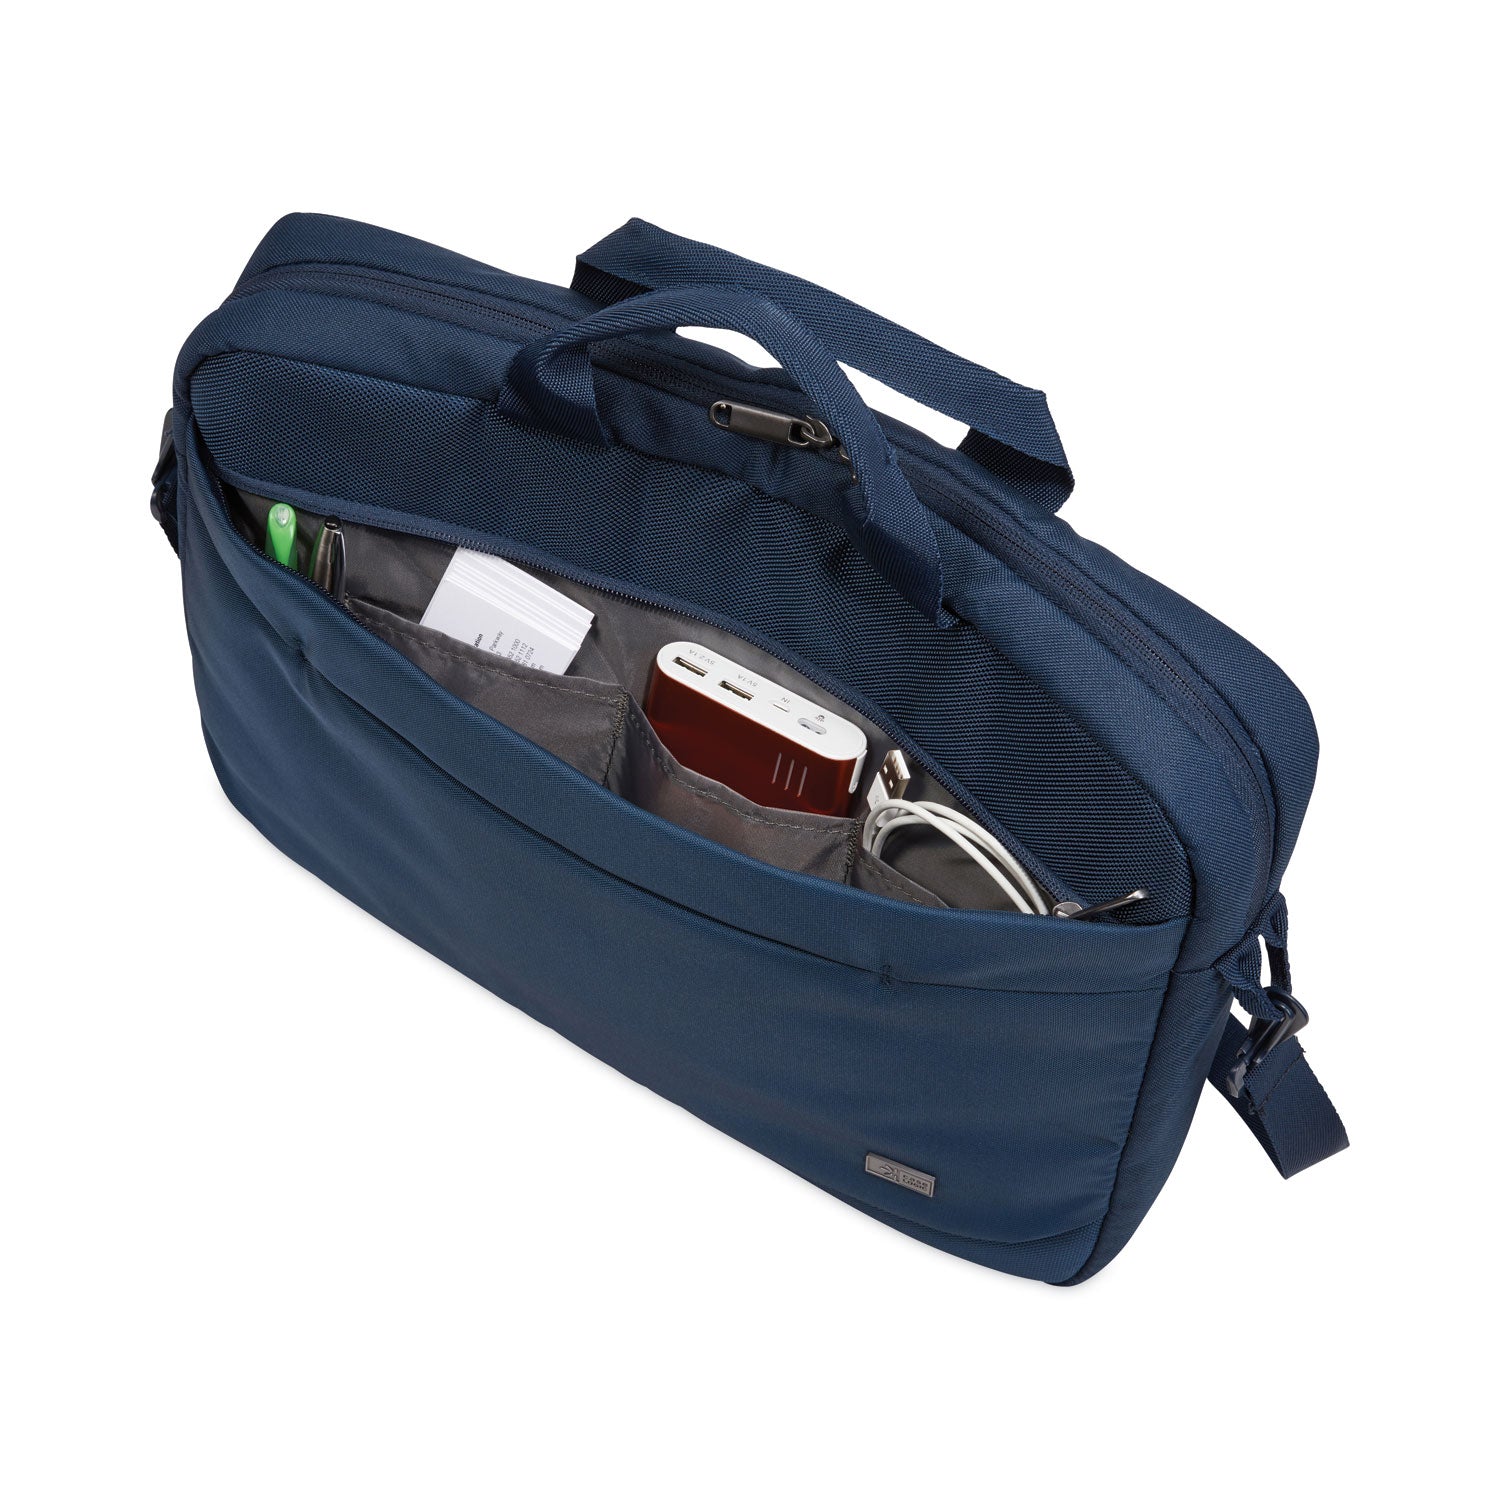 advantage-laptop-attache-fits-devices-up-to-14-polyester-146-x-28-x-13-dark-blue_clg3203987 - 3